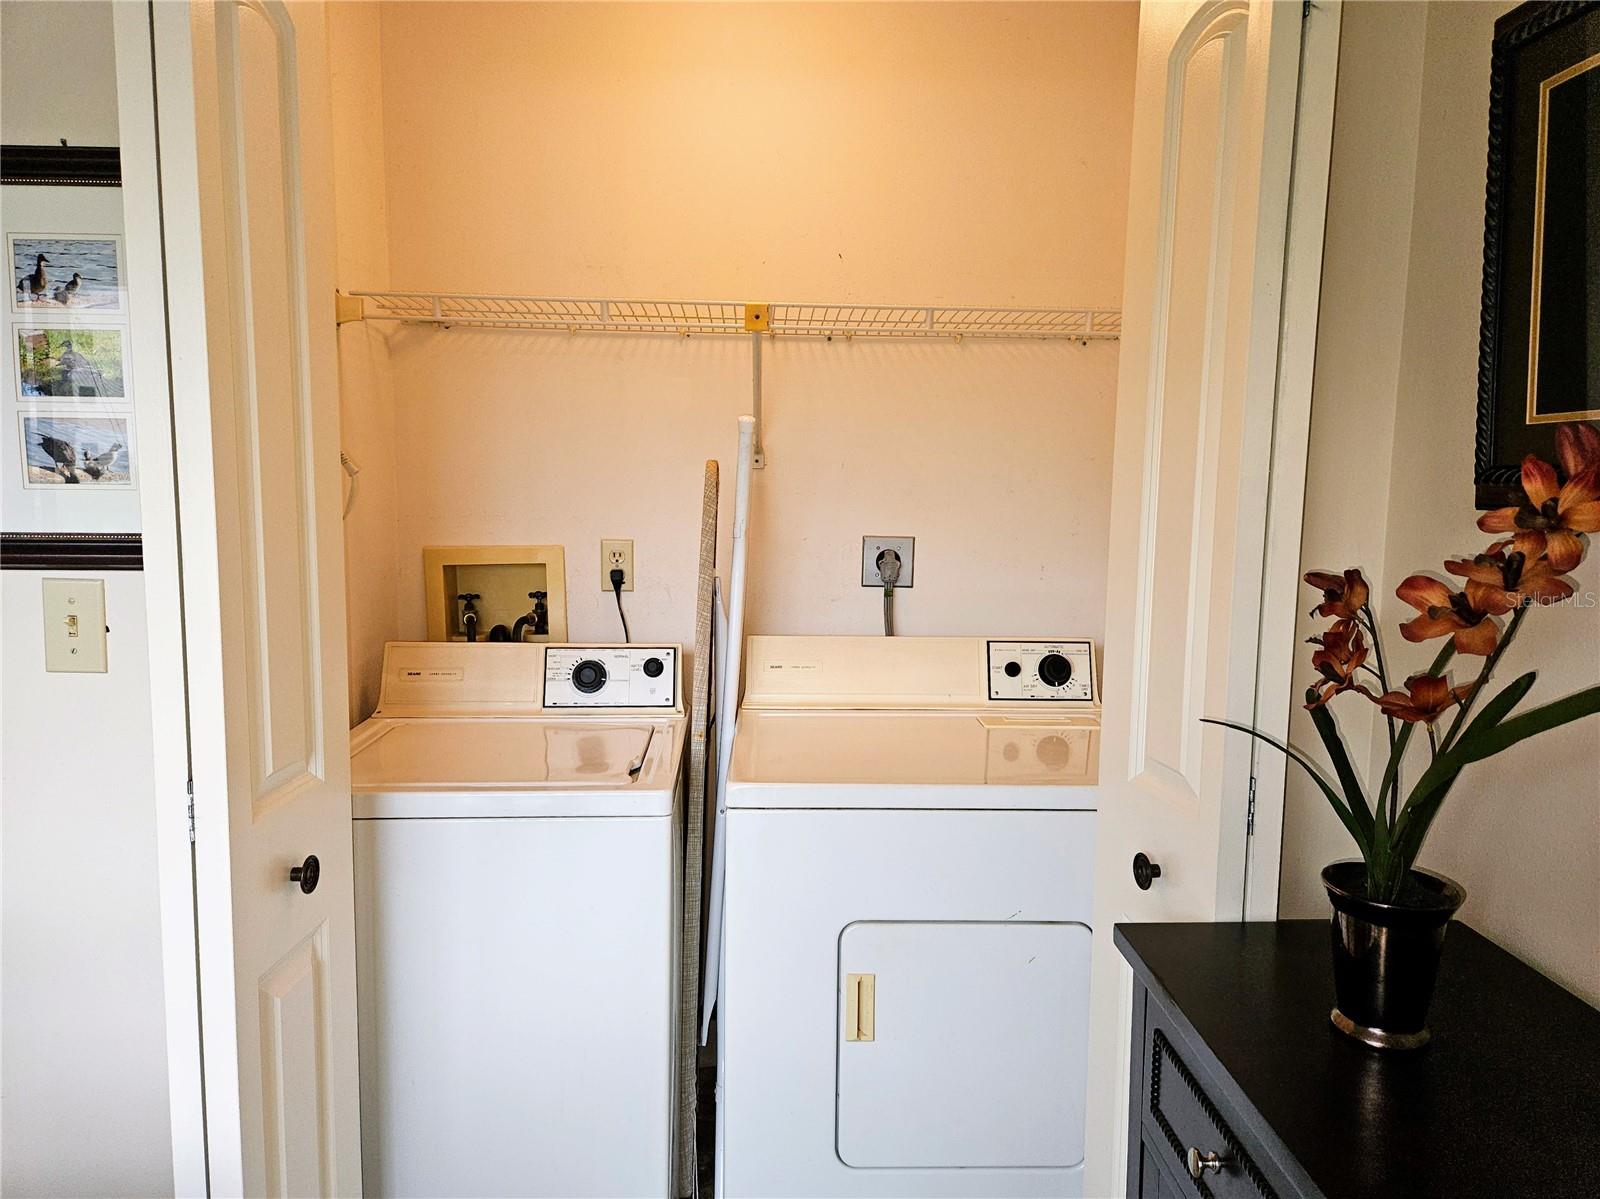 CONVENIENCE - Washer and Dryer Included in the Purchase of the Condo. Laundry Closet between Master Bedroom and Kitchen.